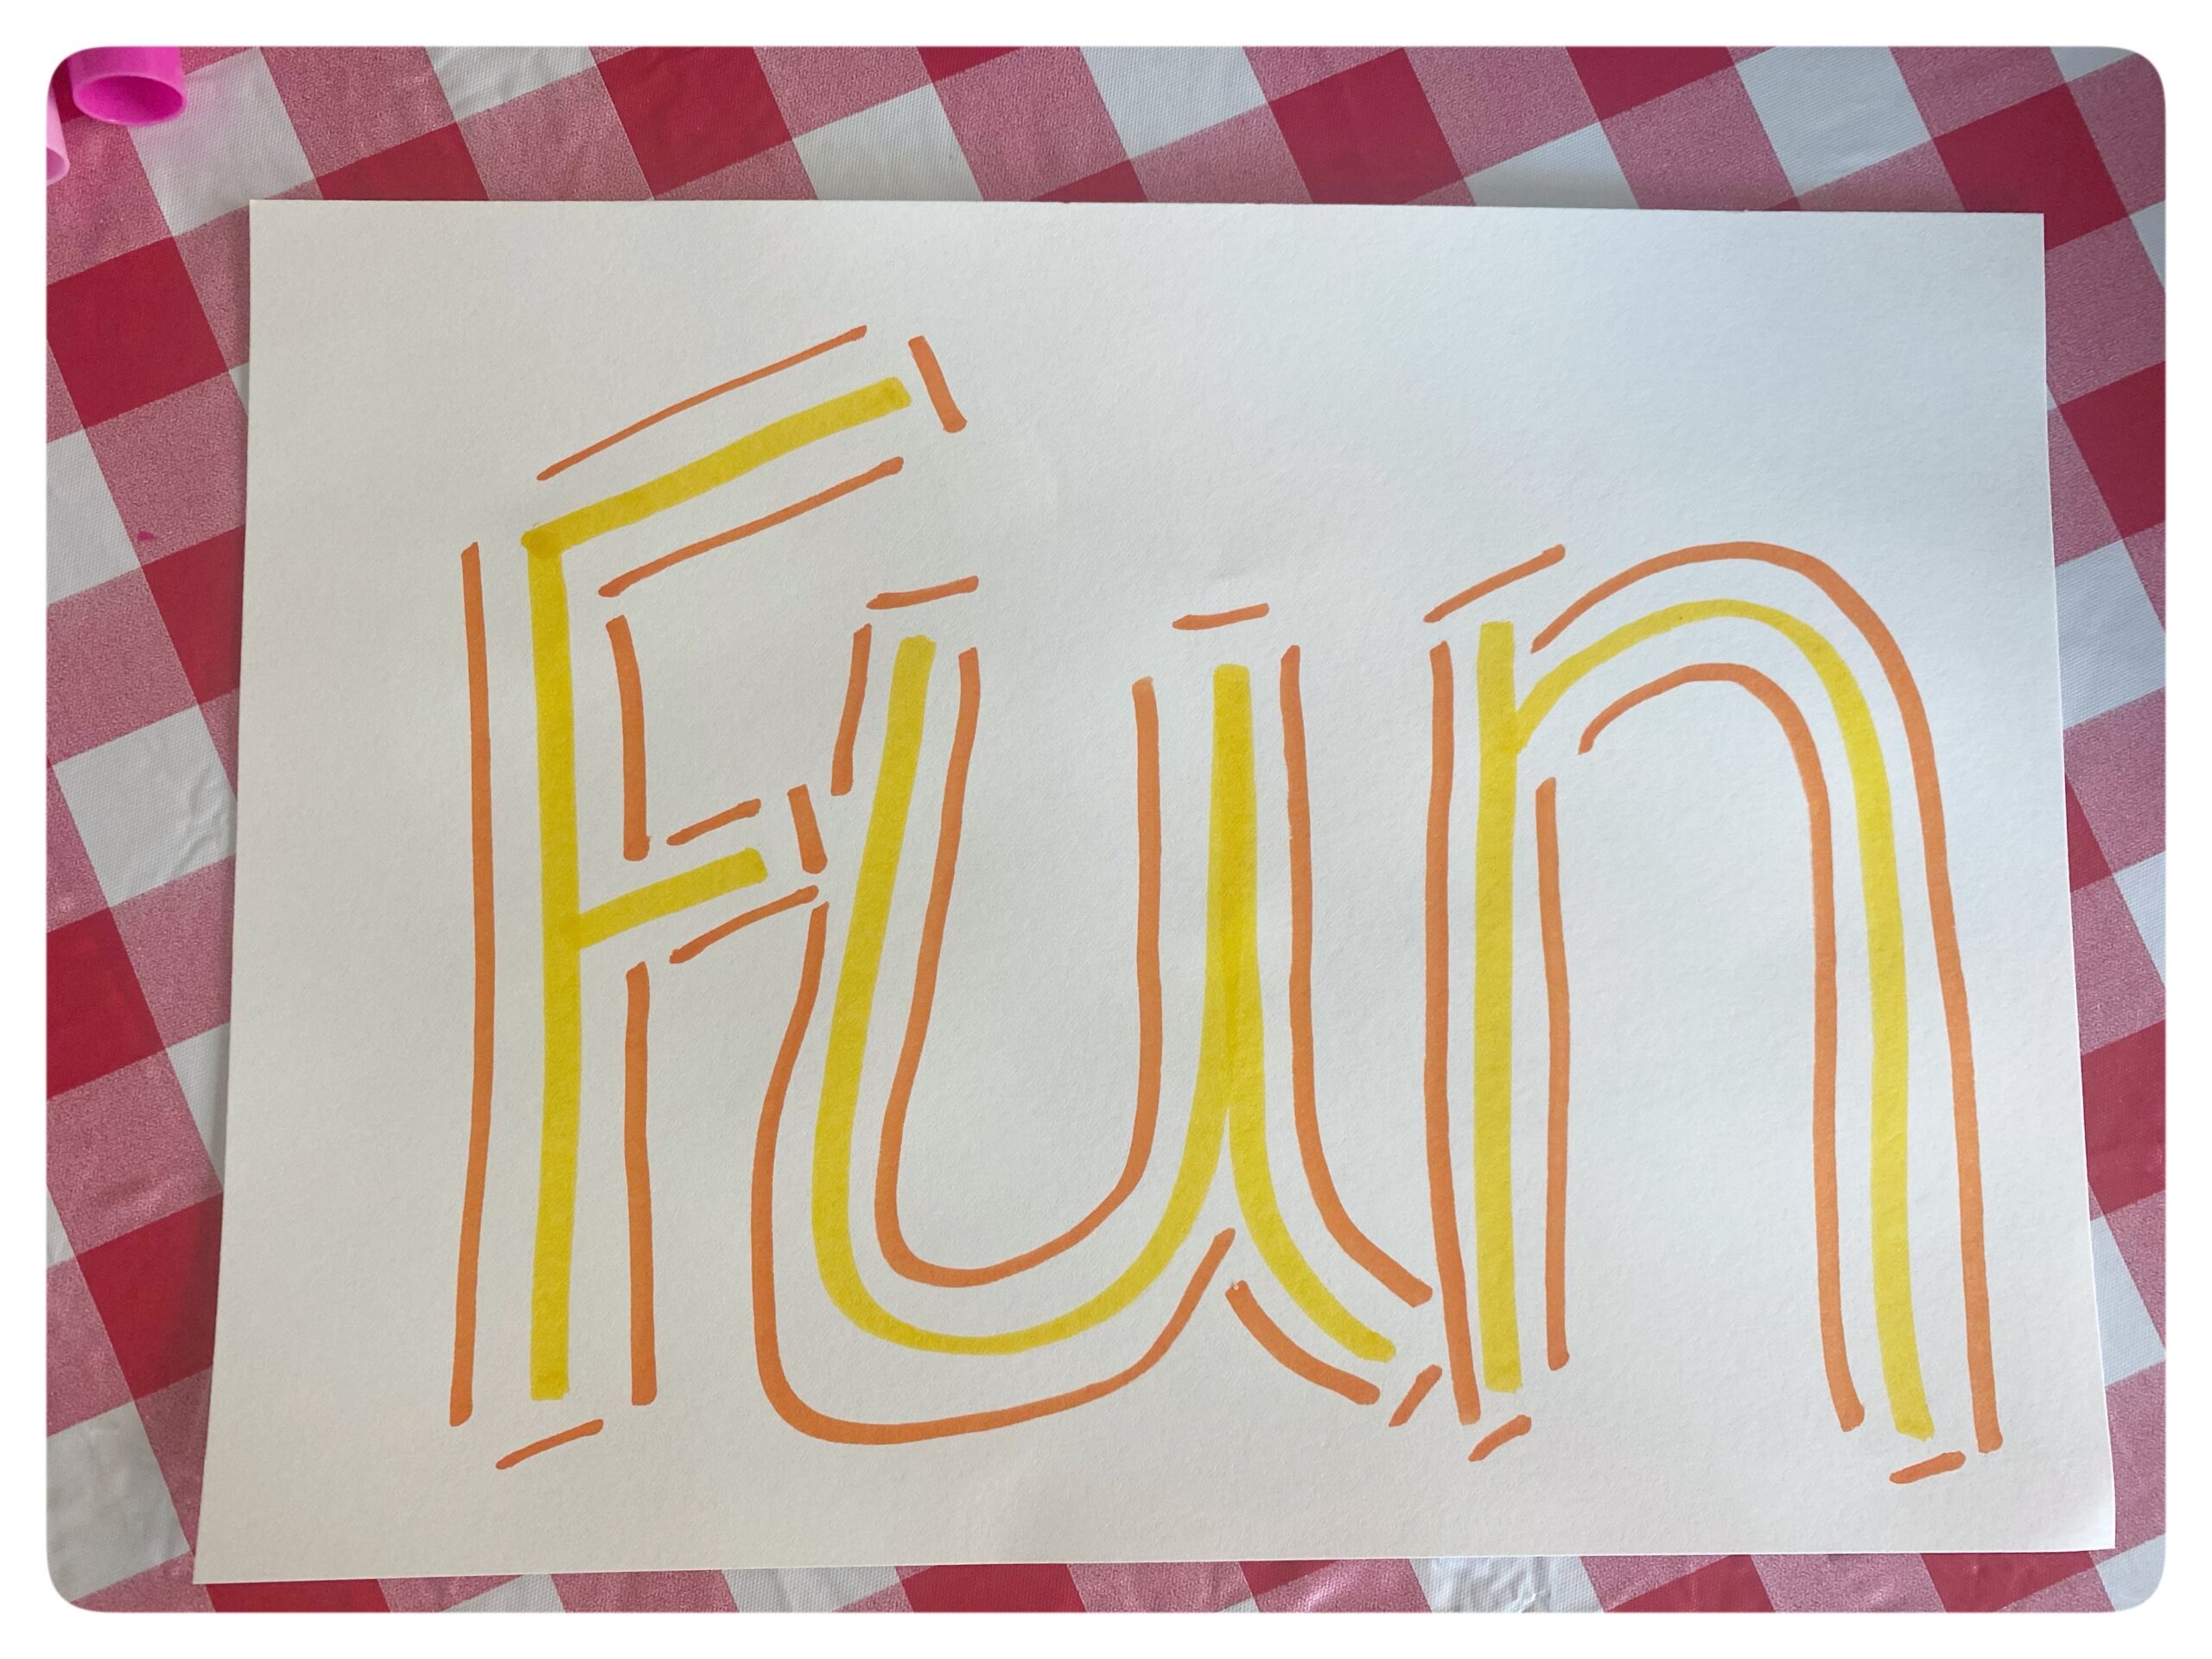 Increasing Confidence through Creativity: I have been using Art as a platform for increasing confidence in children for years so I'm excited to show you a few simple ideas you can do at home.